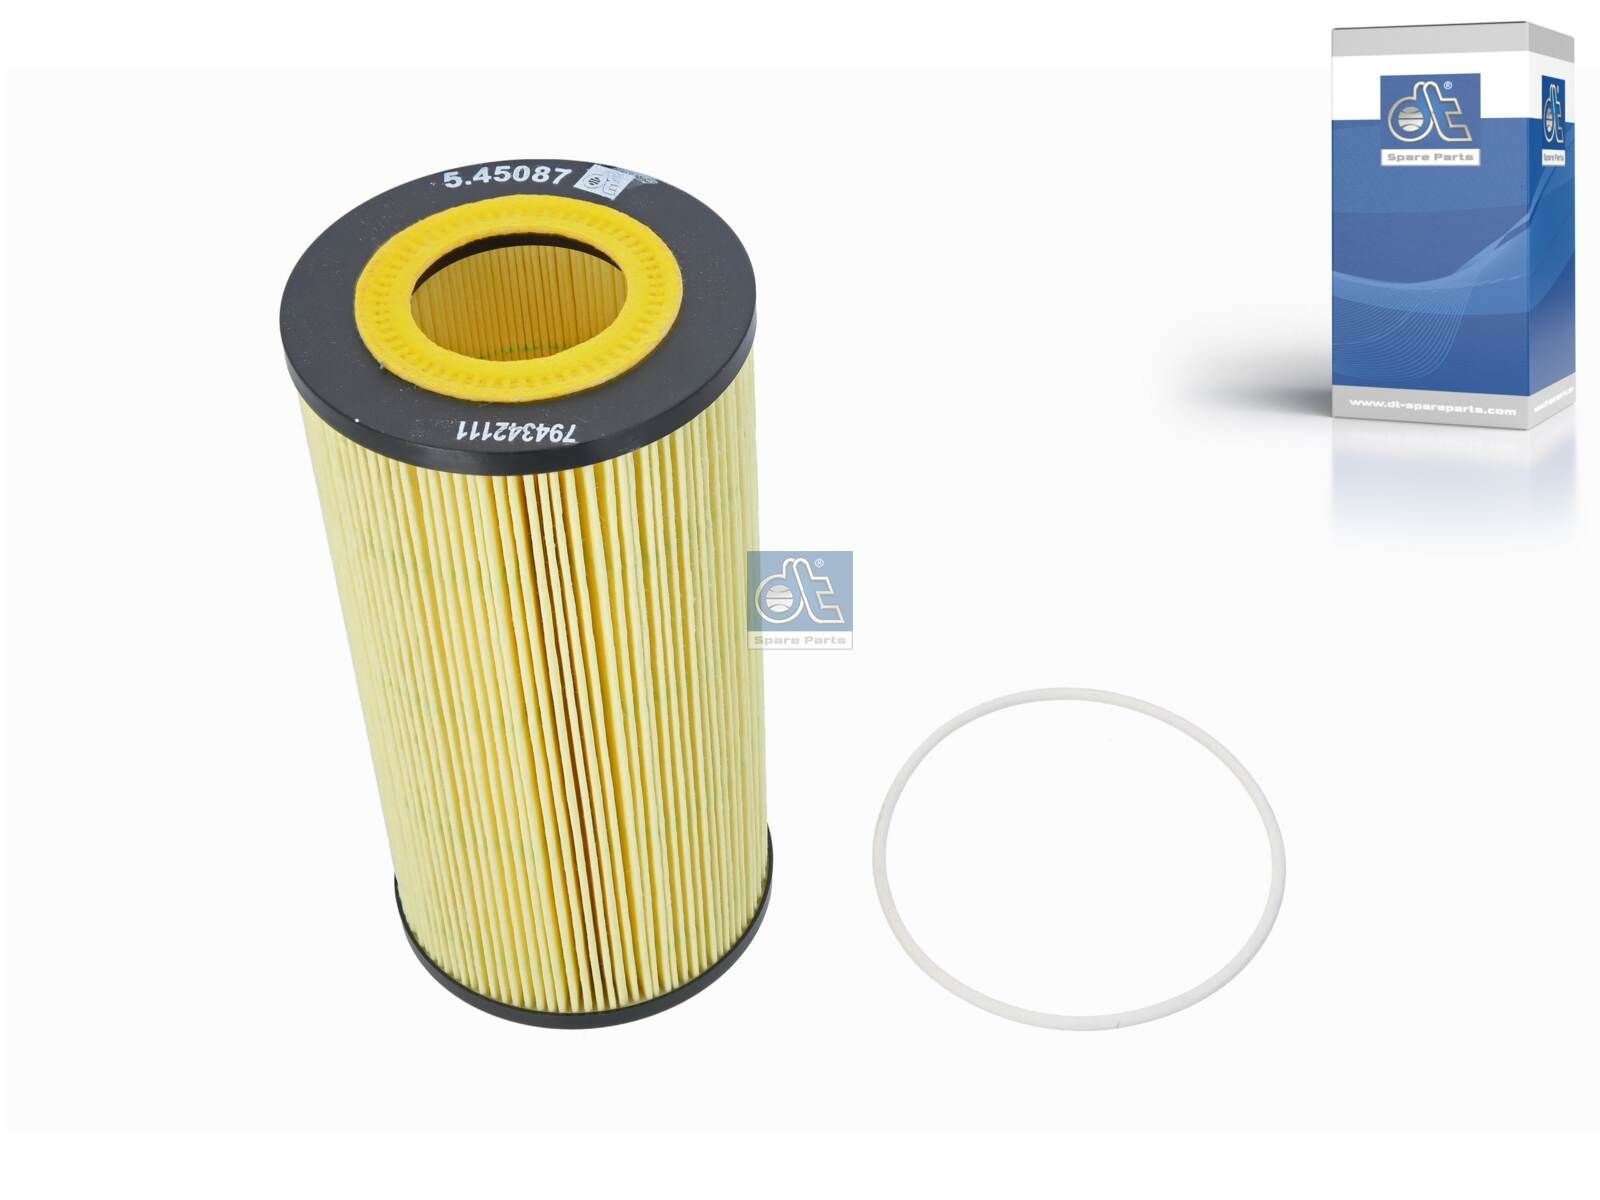 HU 12 103 x DT Spare Parts 5.45087 Oil filter 164 3070